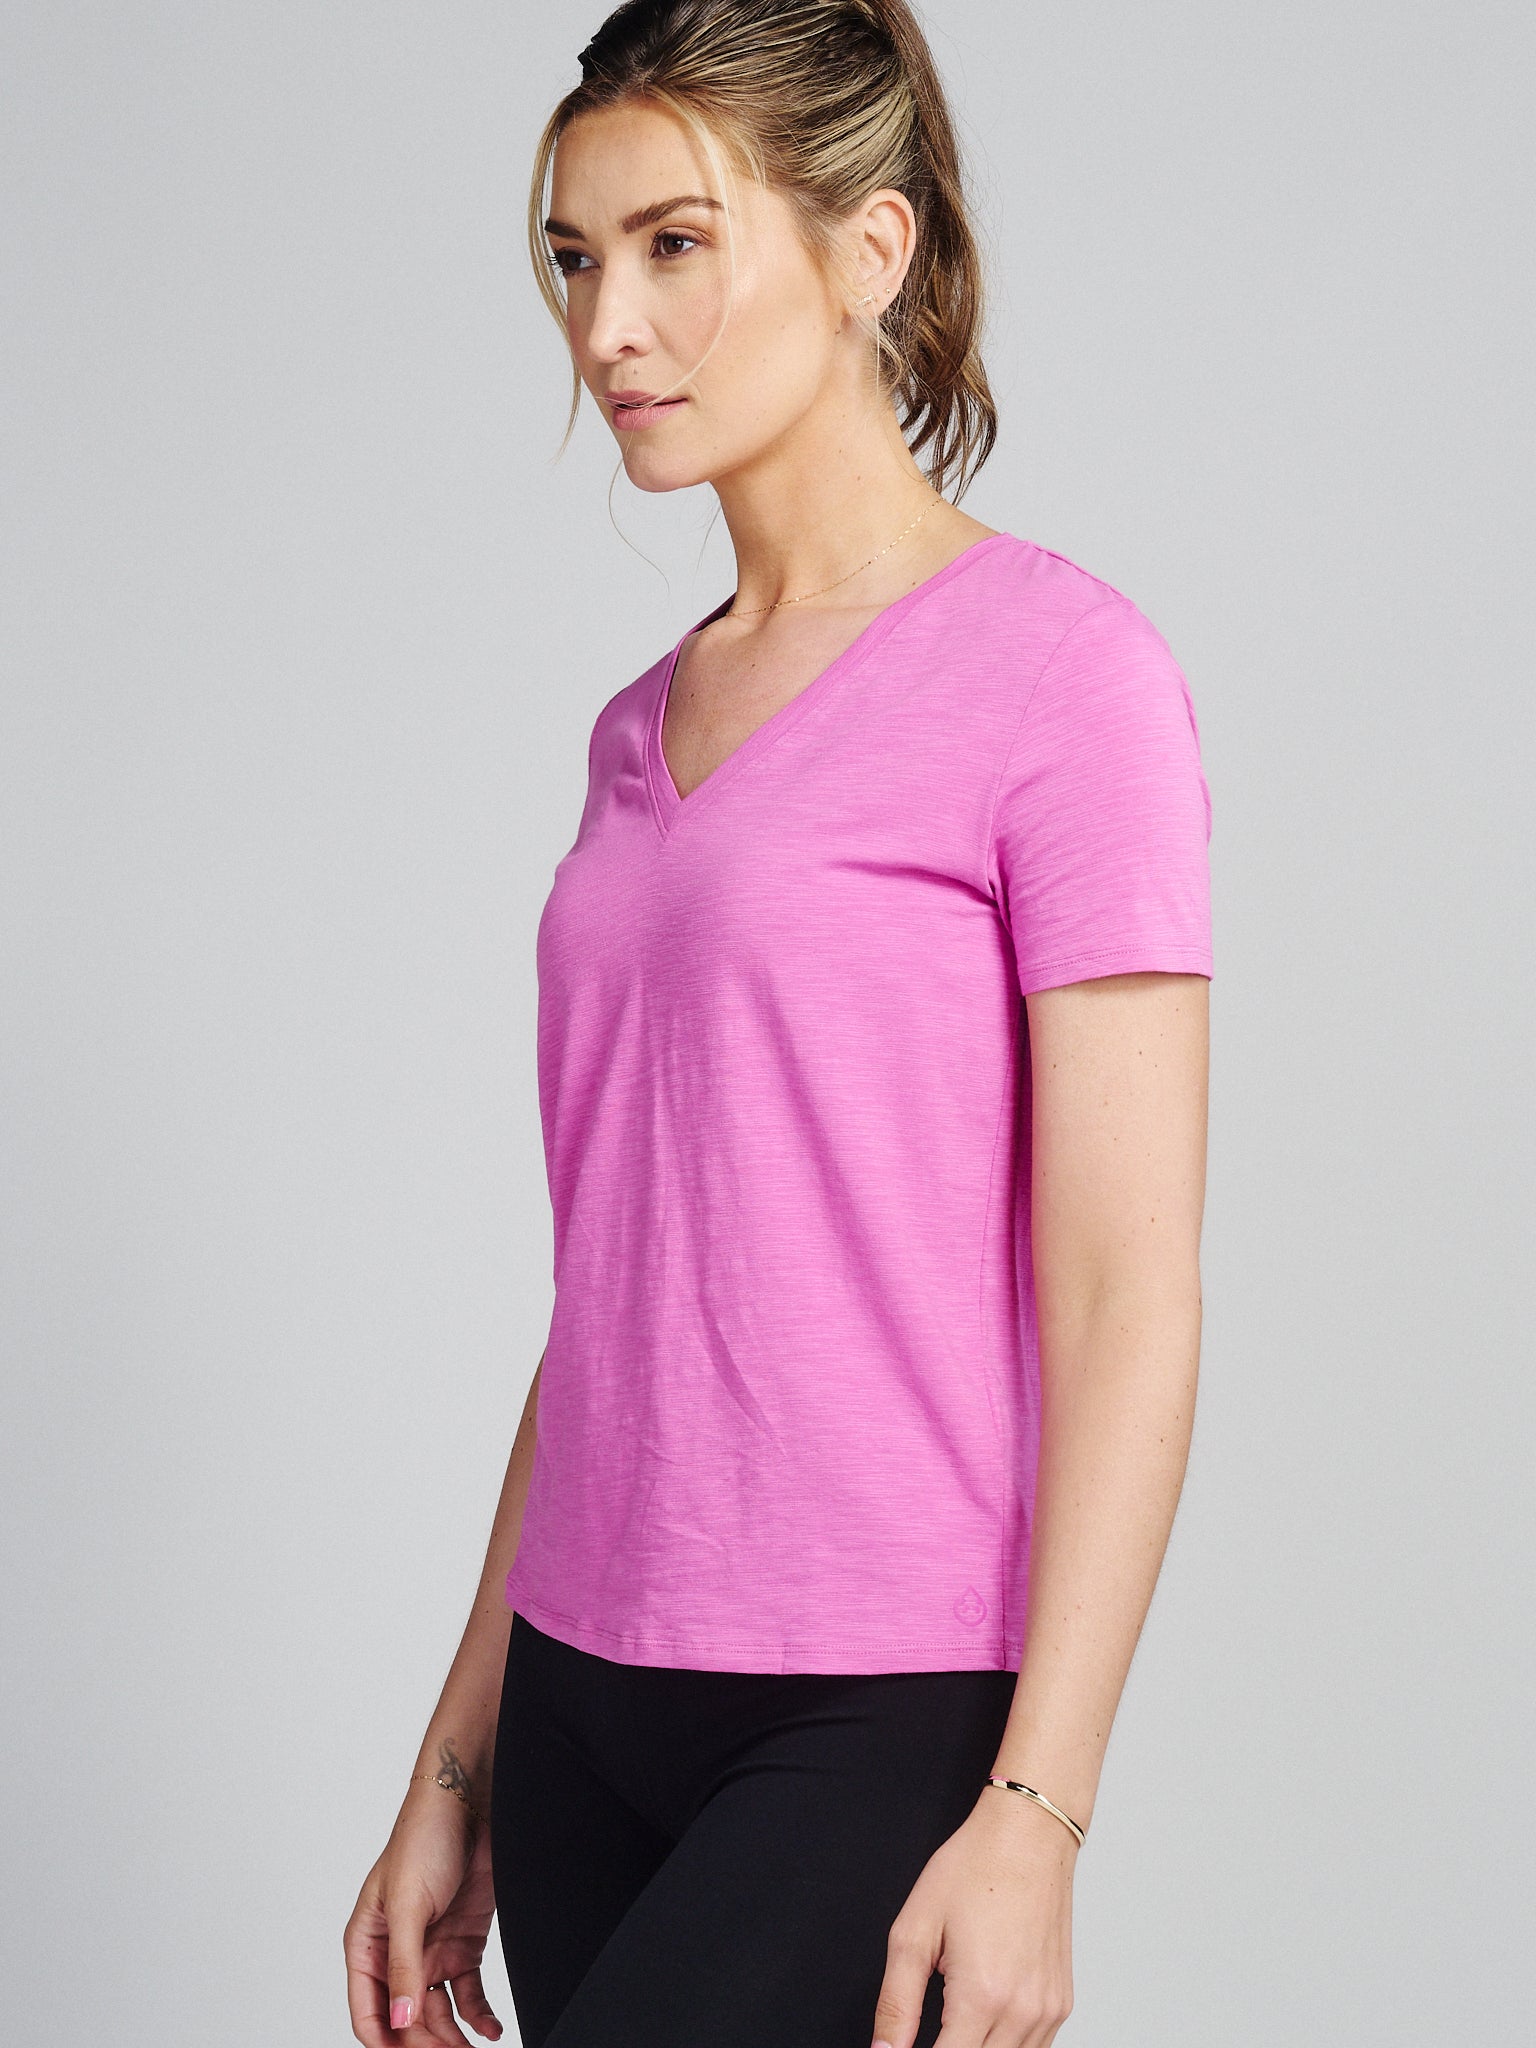 All Day V-Neck T-Shirt tasc performance (Orchid)